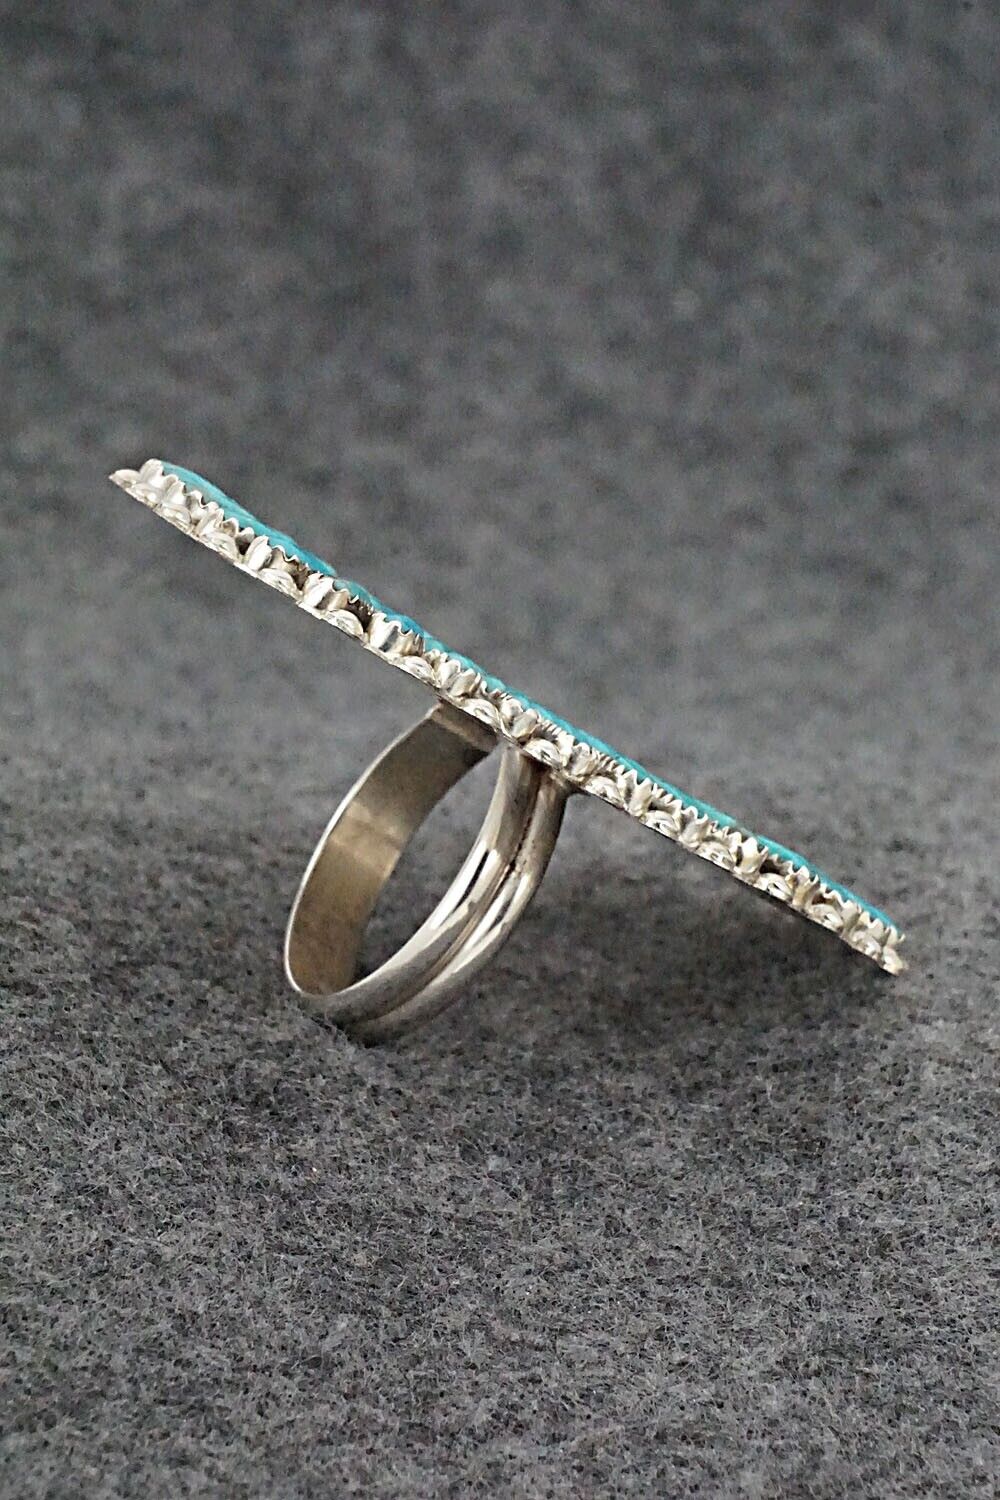 Turquoise & Sterling Silver Ring - Lavell Byjoe - Size 9.5